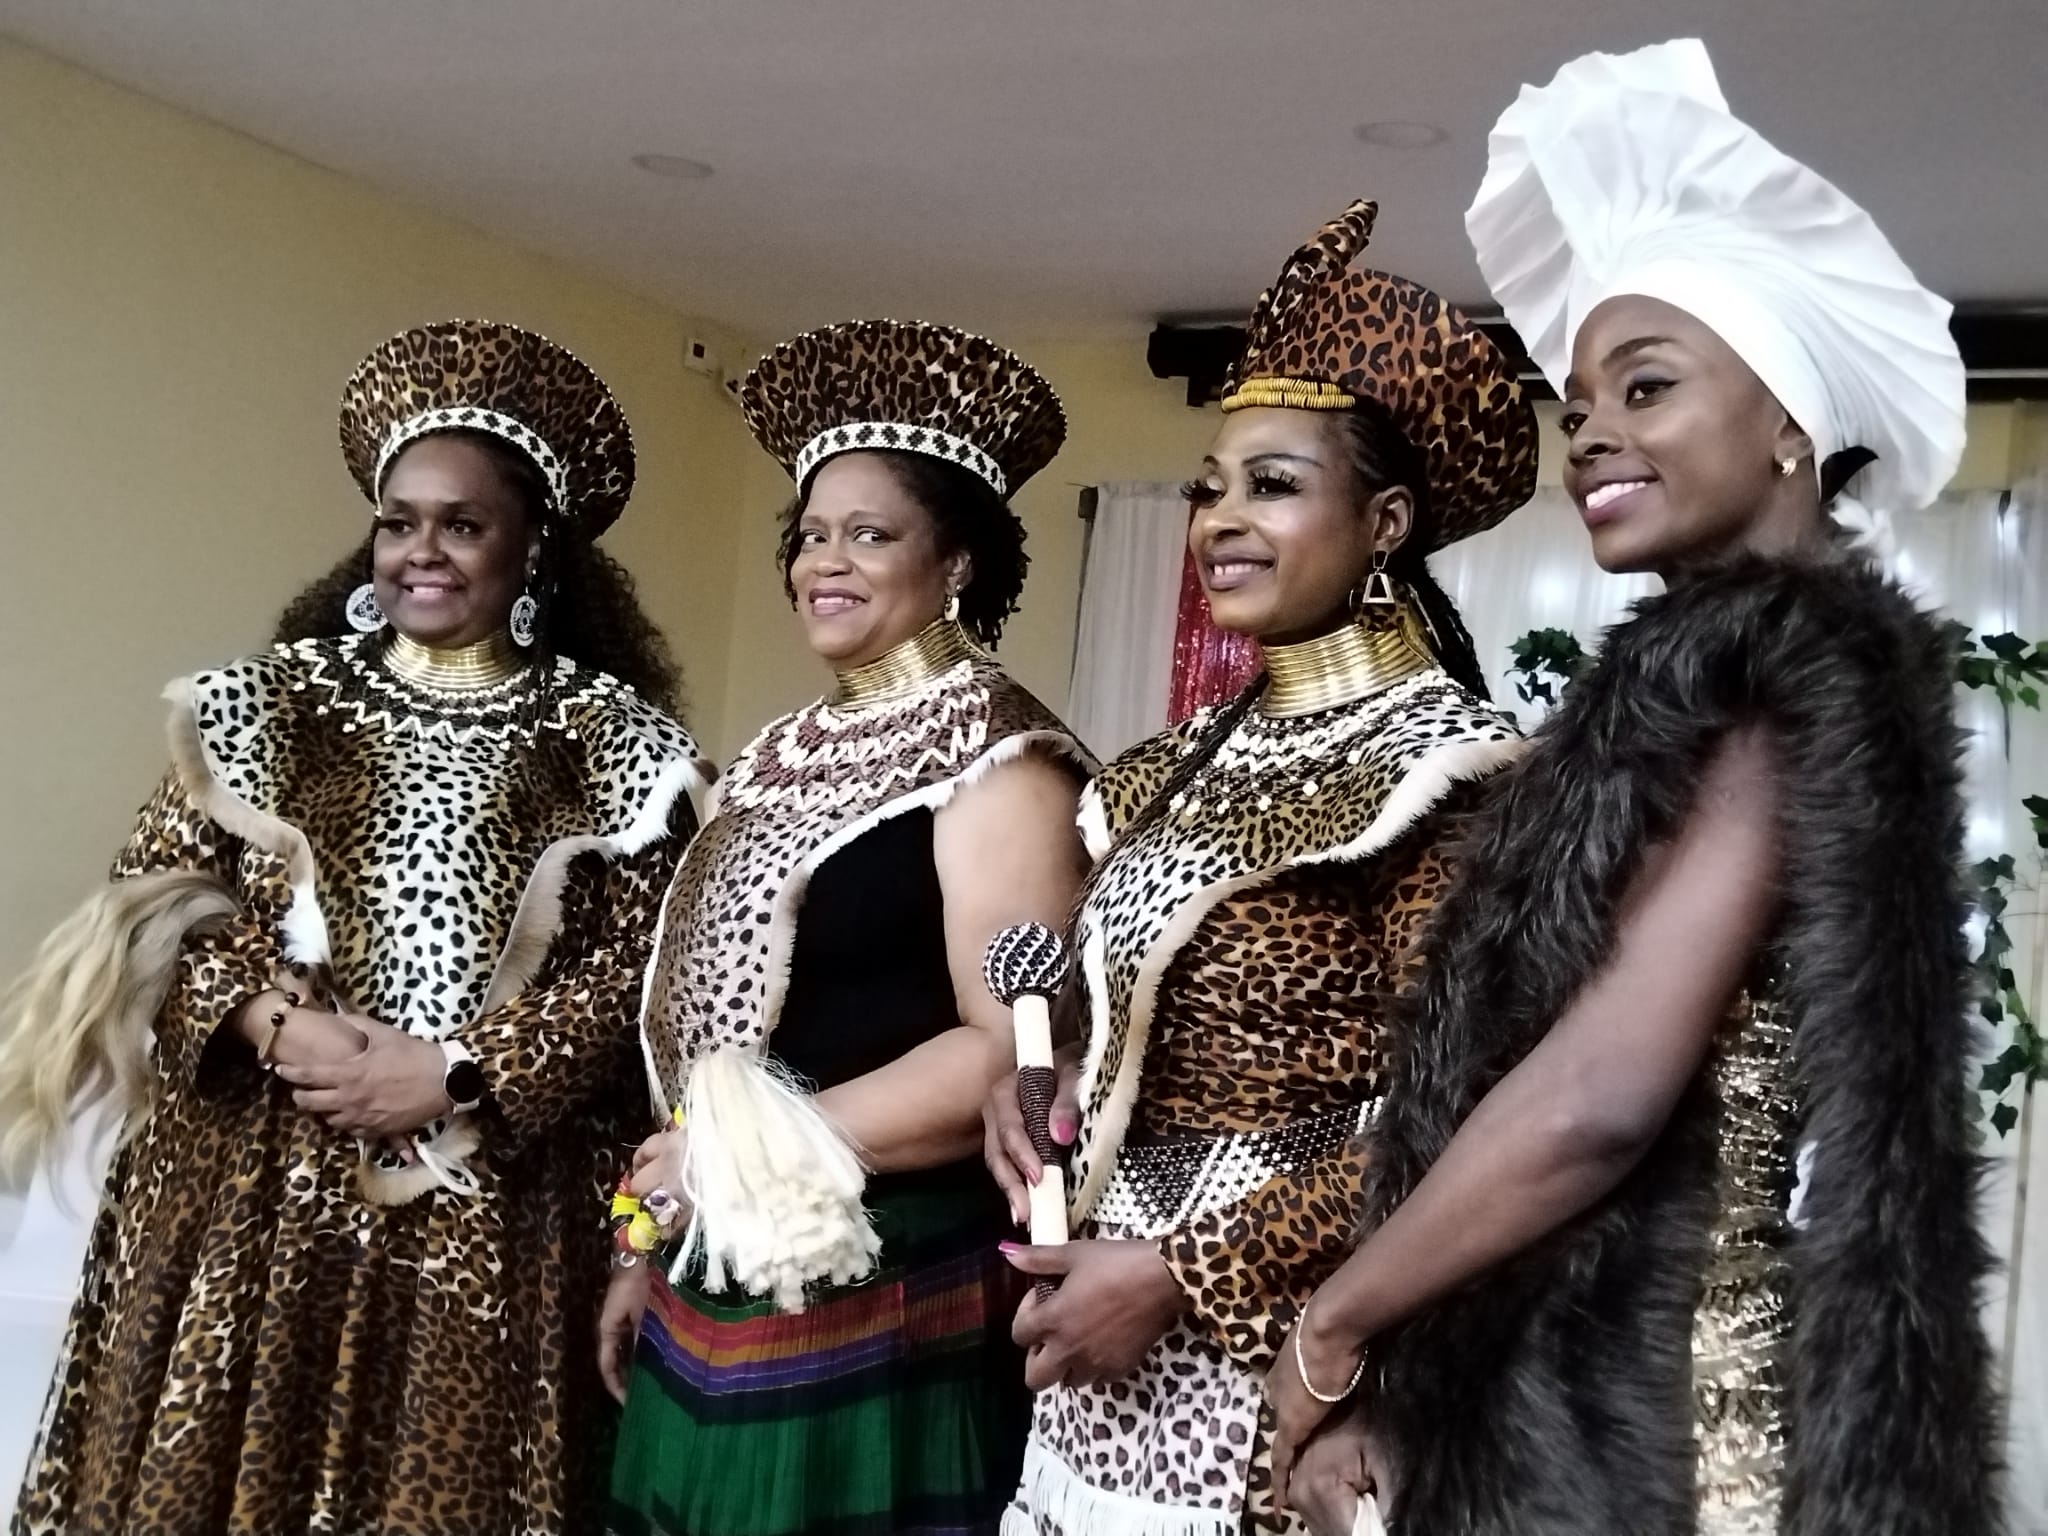 Asaleh II,  Newly enstooled Queen of the Caribbean, HRH Queen Hilary Browm and Queen Mzilikazi III of South Africa.